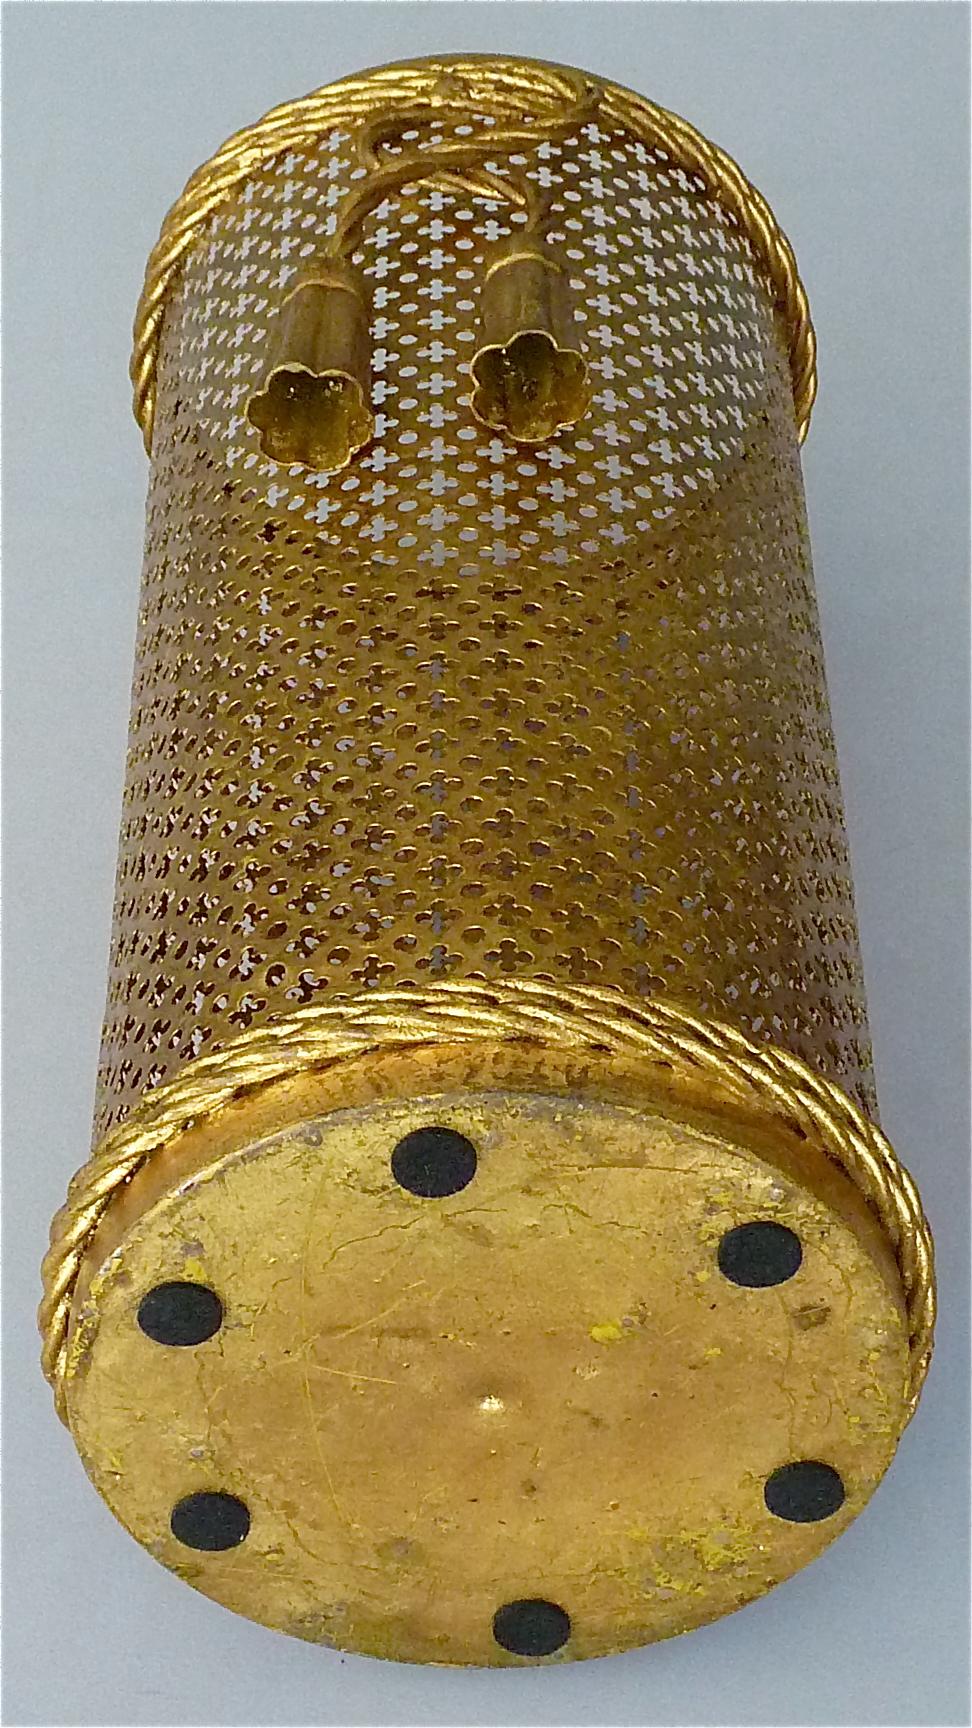 Italian Midcentury Umbrella Stand Gilt Perforated Metal, Hans Kögl Style, 1950s For Sale 5